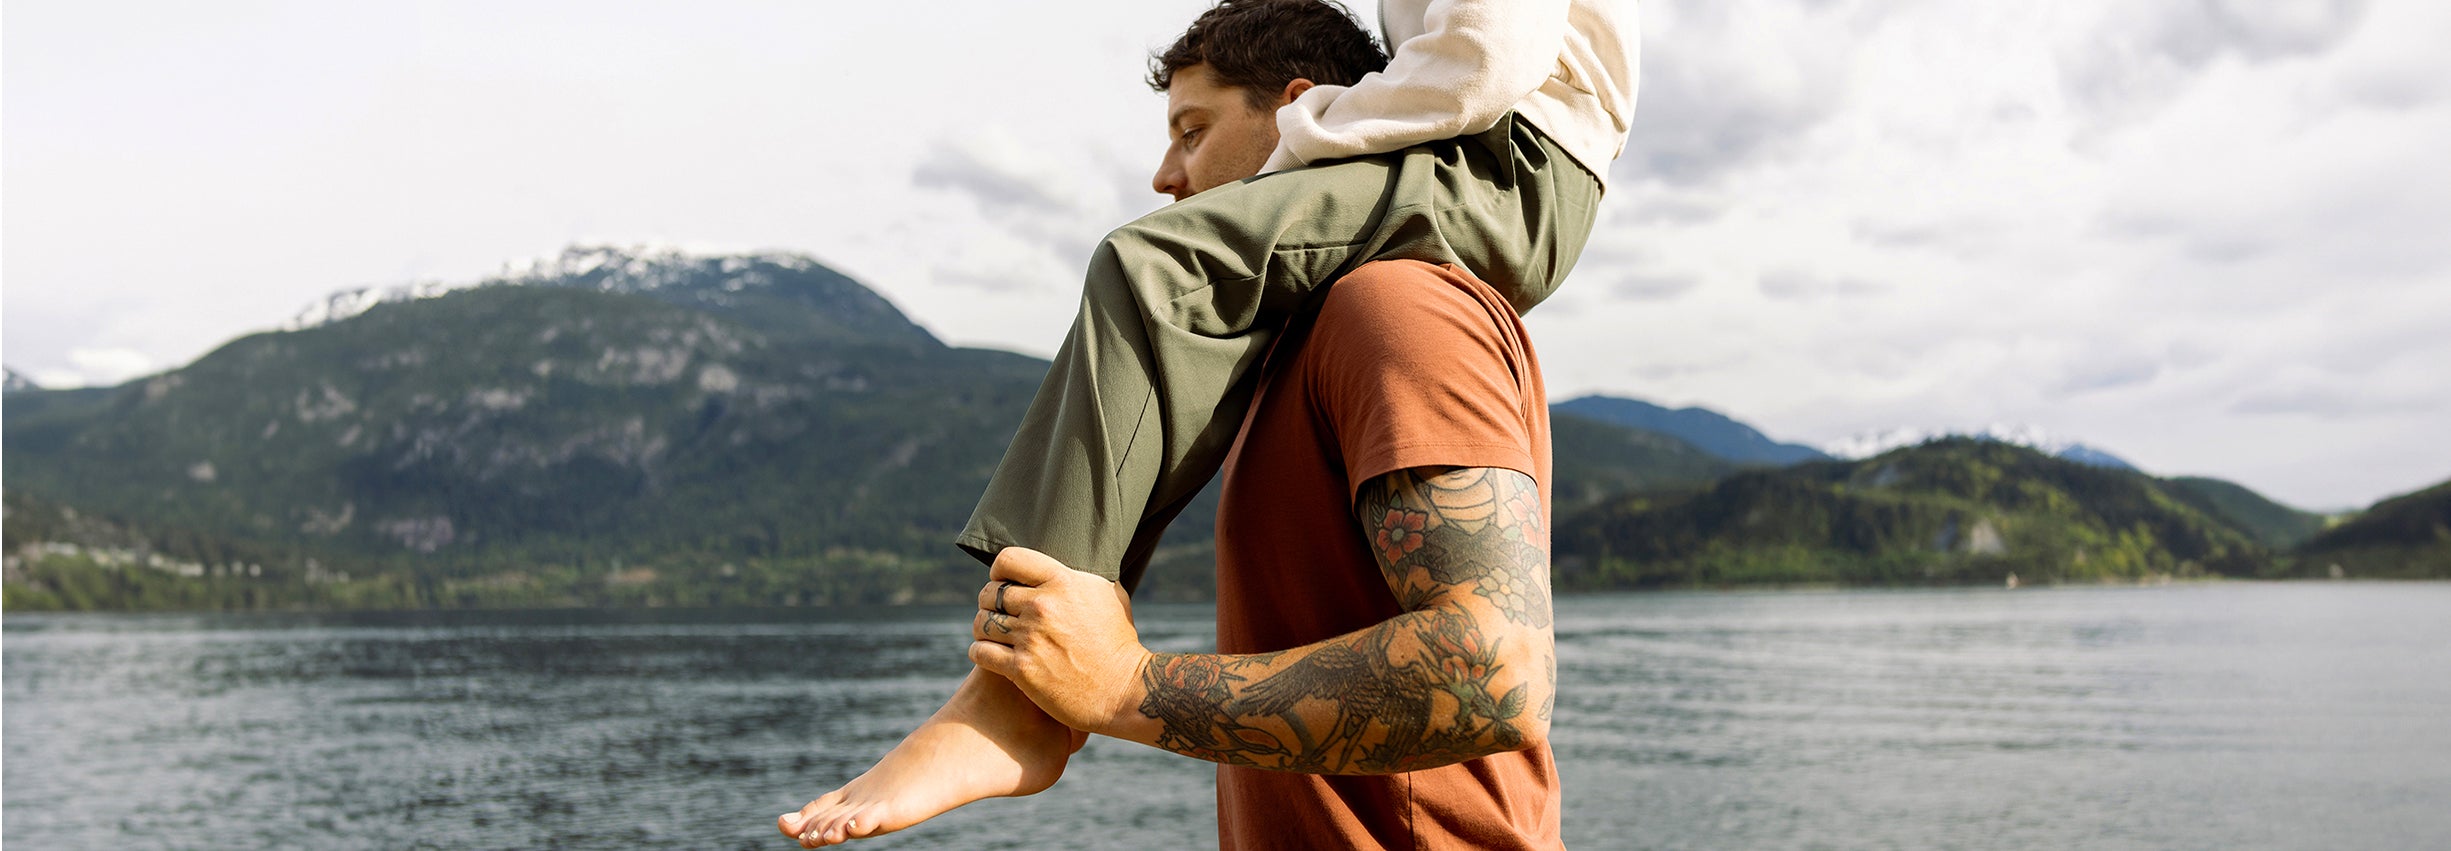 A man with arm tattoos carries a woman on his shoulders by a large scenic lake.